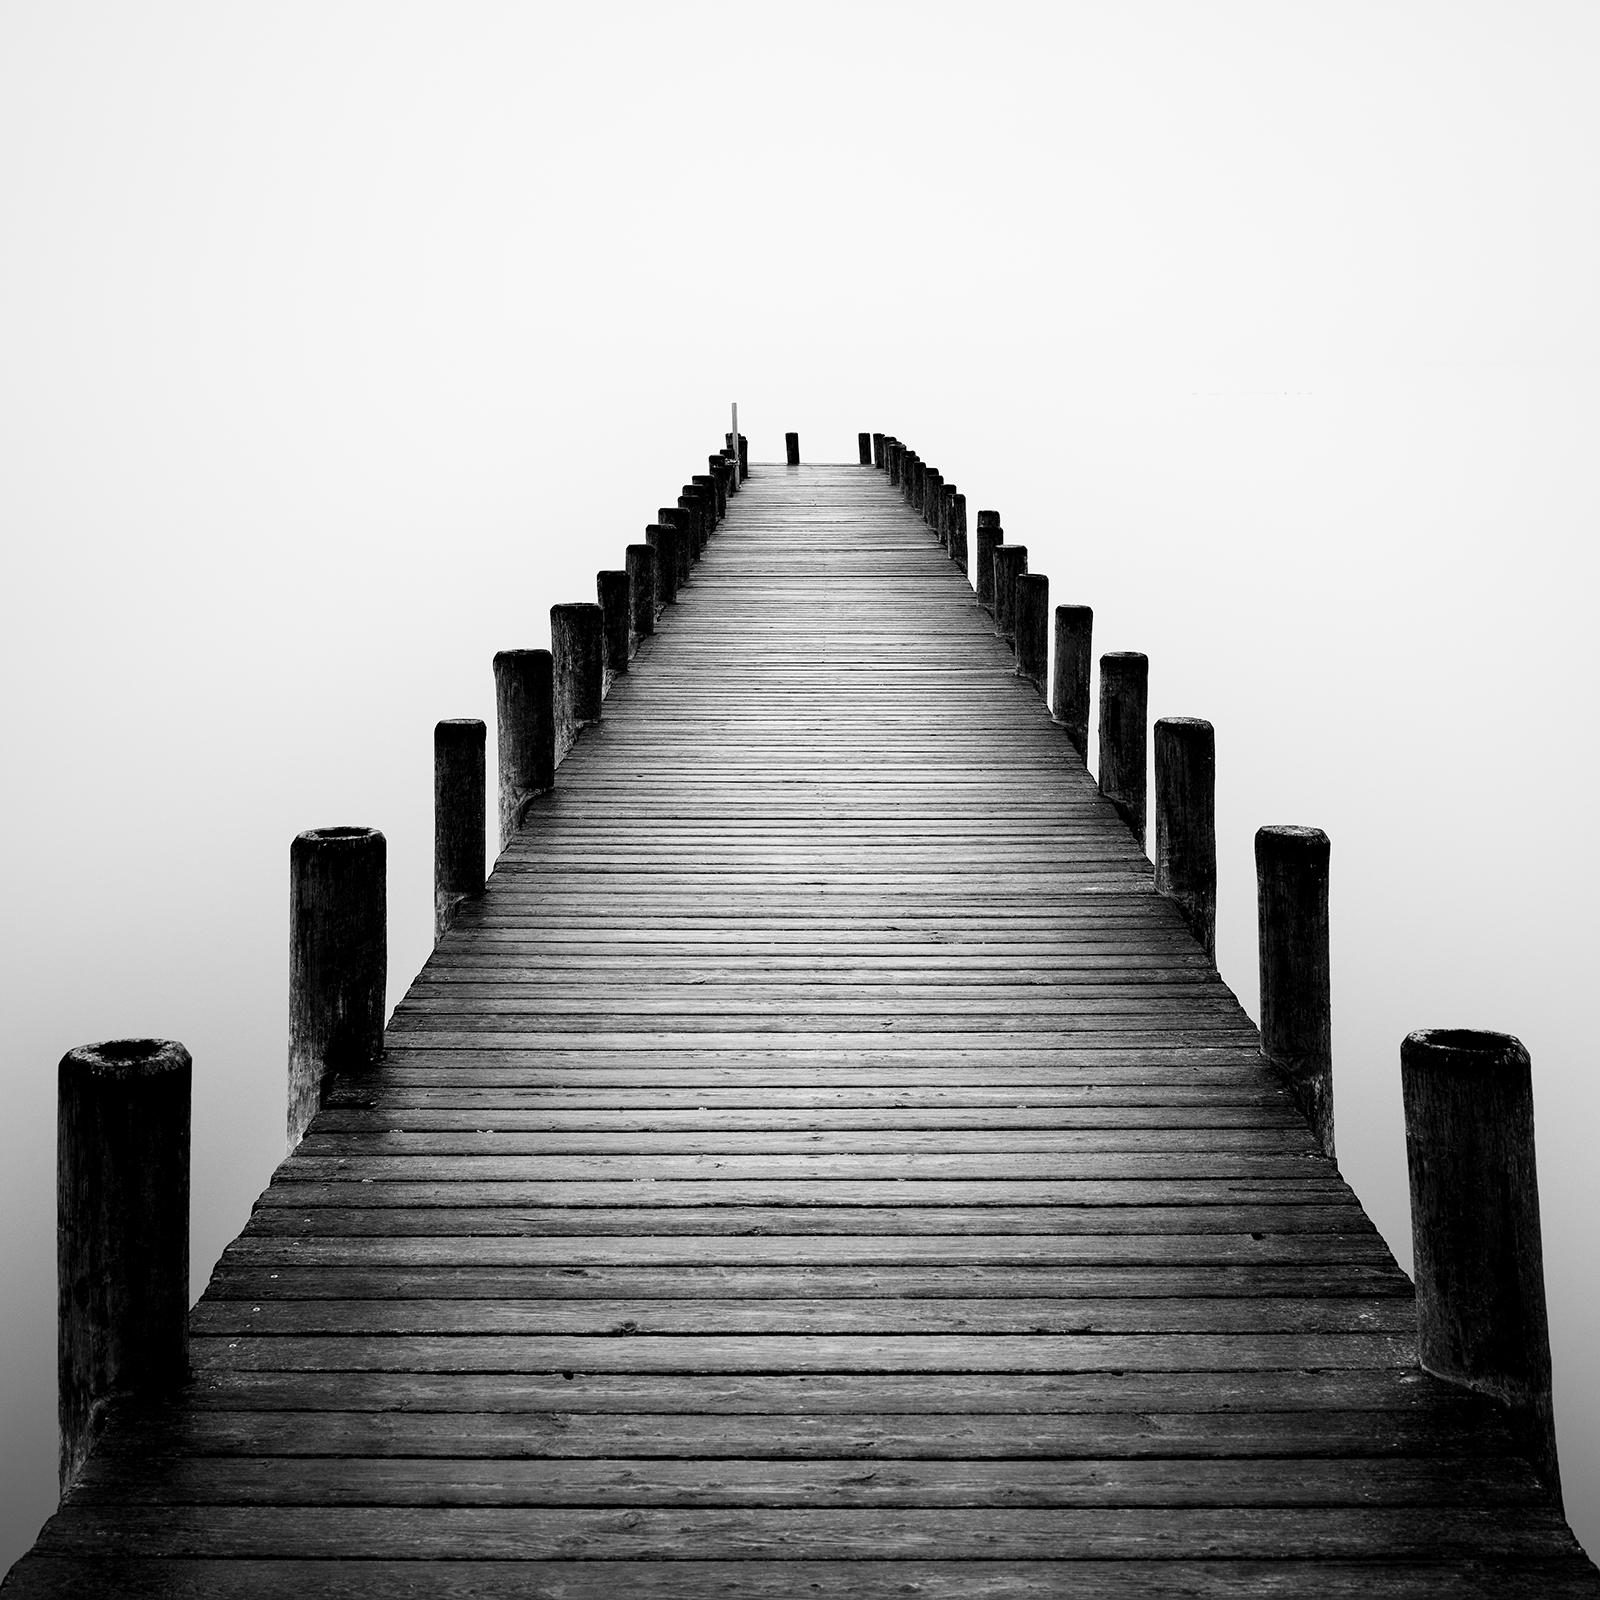 Pier on misty Lake, long exposure, black and white art waterscape photography For Sale 4